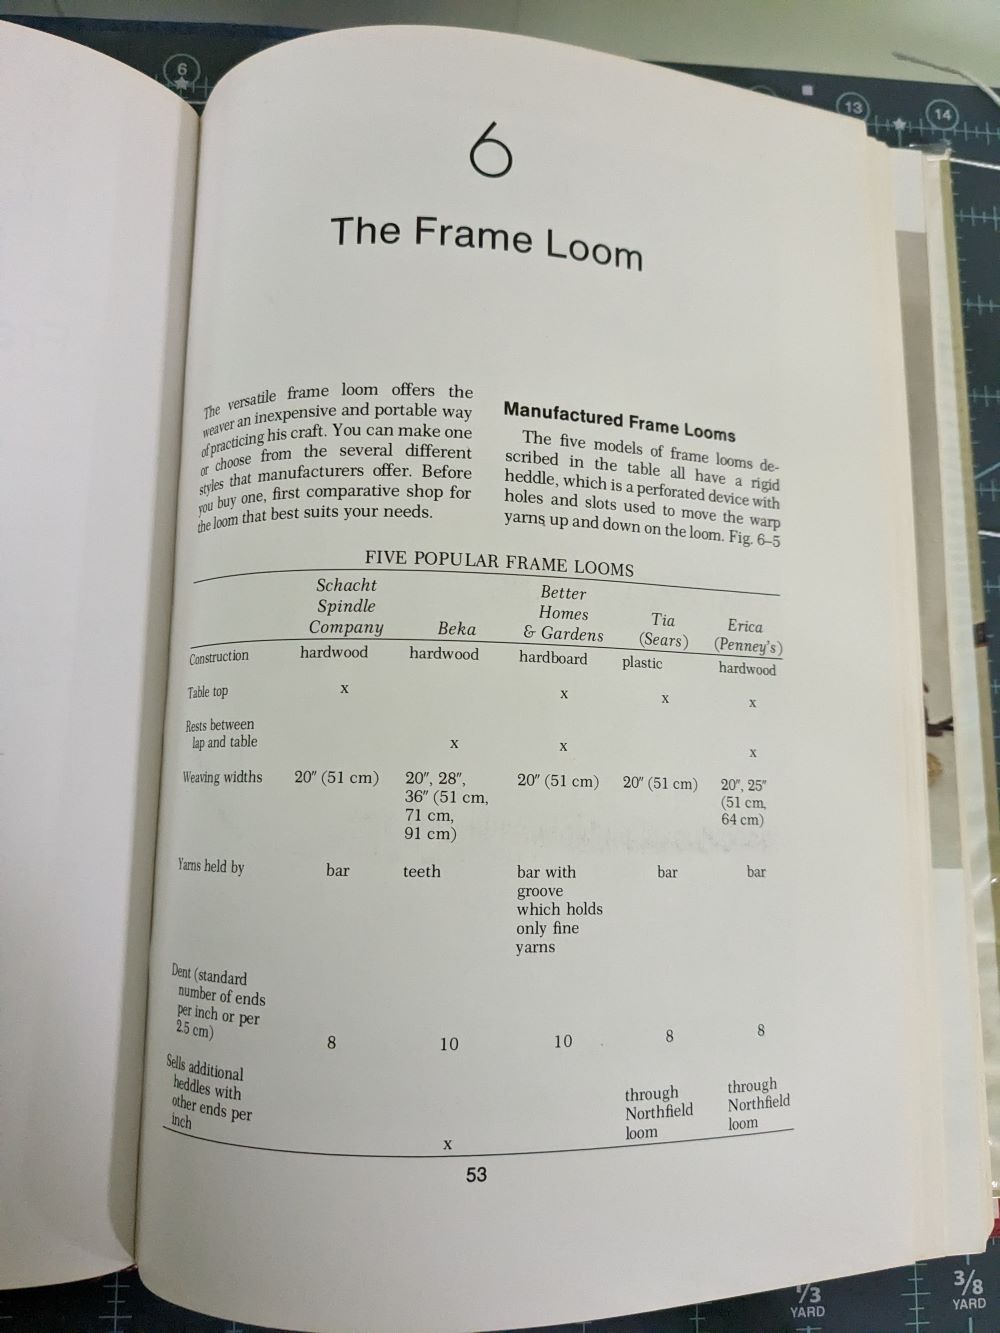 List of manufacturers of 'Frame Looms' from The Weaving Primer, 1978